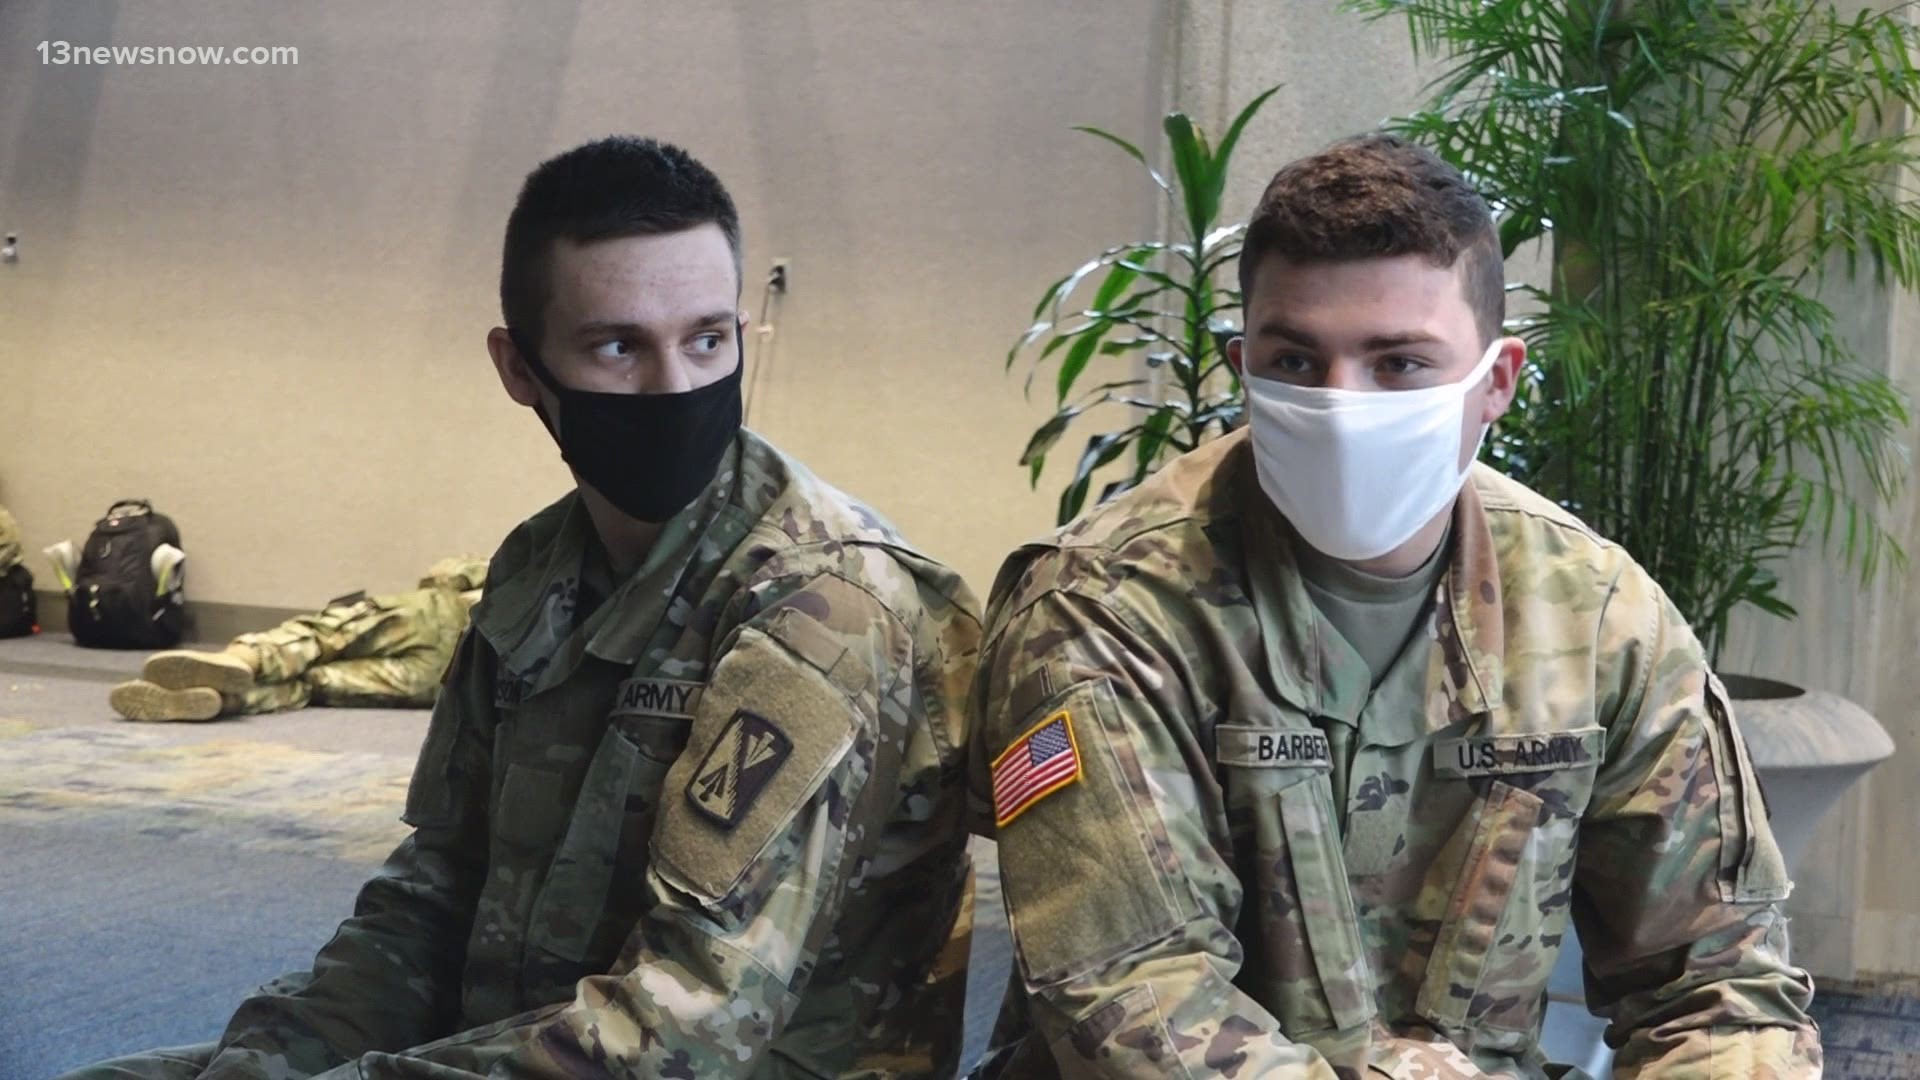 The USO didn't stop taking care of servicemembers because of the pandemic - they just added face masks to their "goodbye" flight care packages.